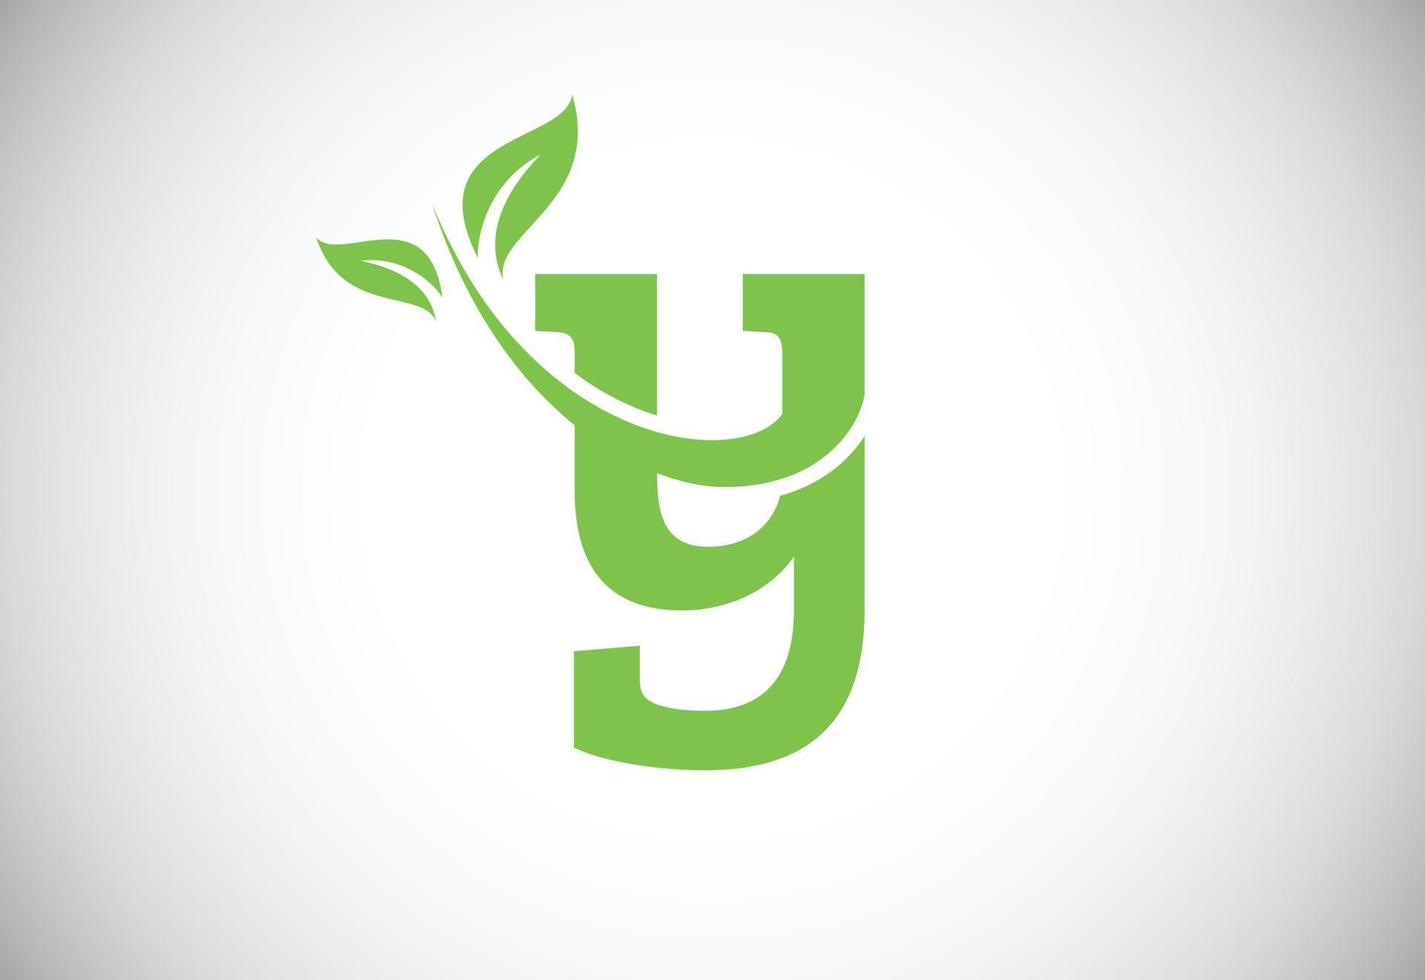 Initial letter Y and leaf logo. Eco-friendly logo concept. Modern vector logo for ecological business and company identity